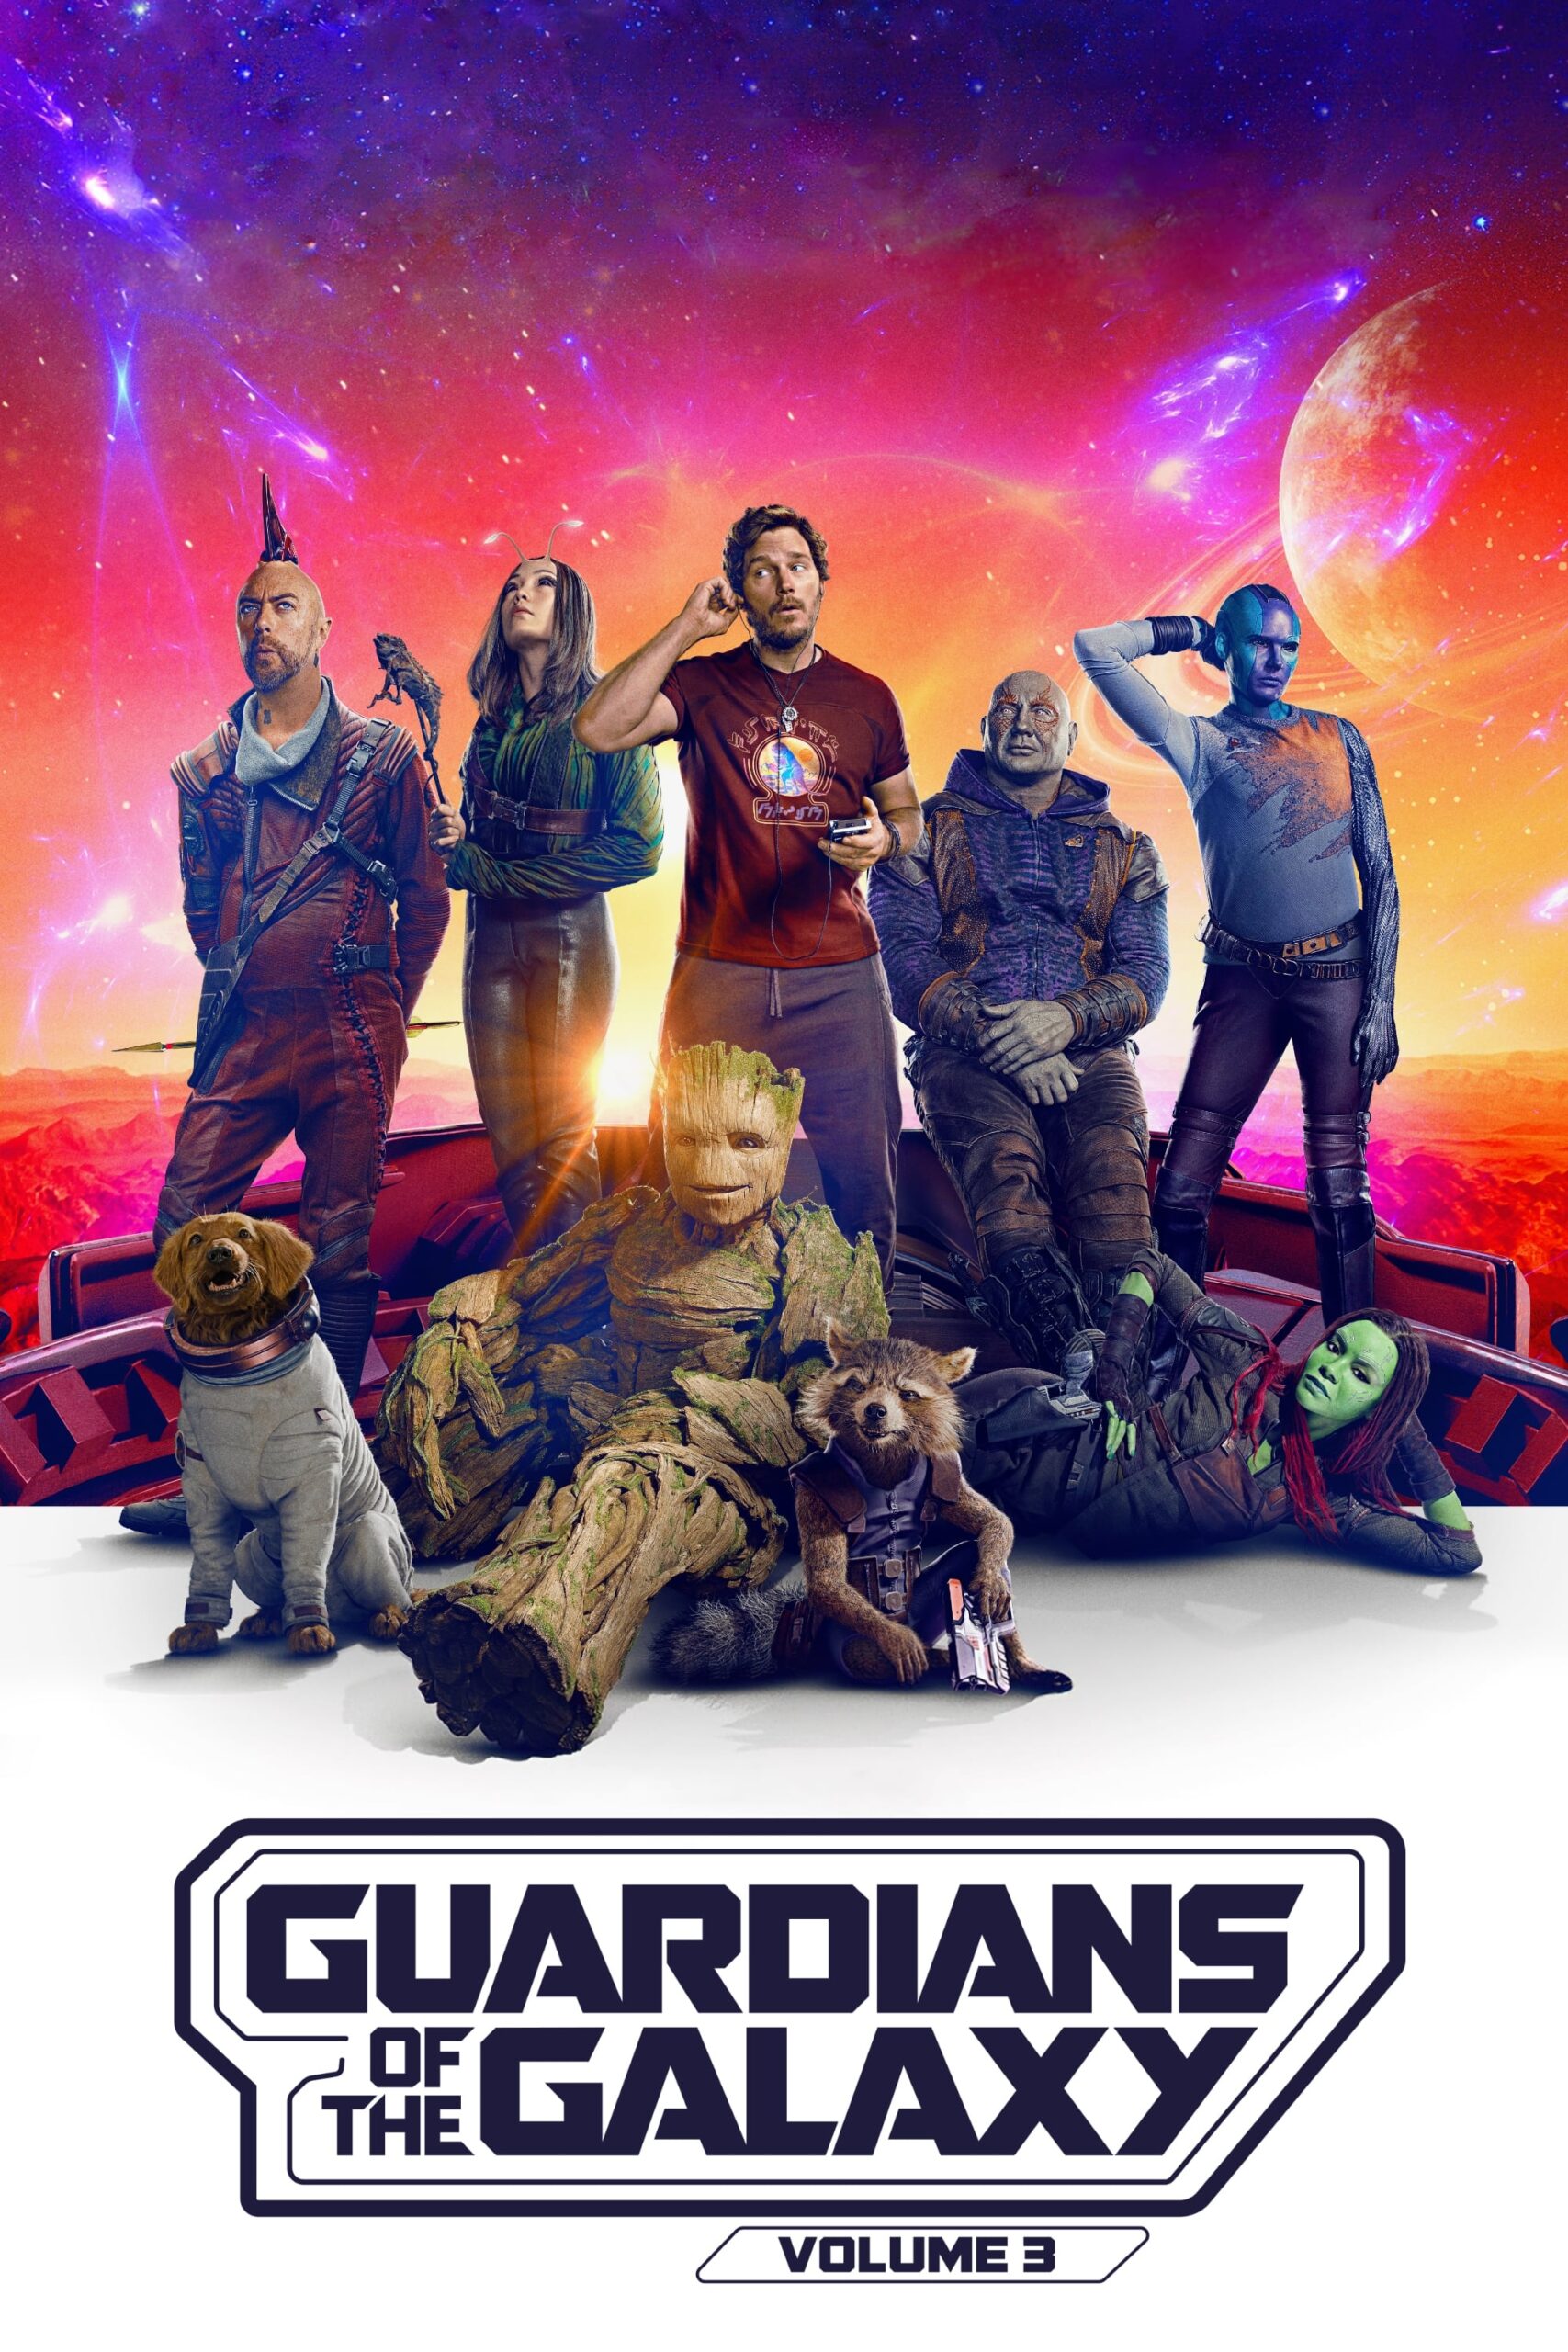 Download Guardians of the Galaxy Volume 3 (2023) (Dual Audio) {English-Hindi} Movie on Techoffical